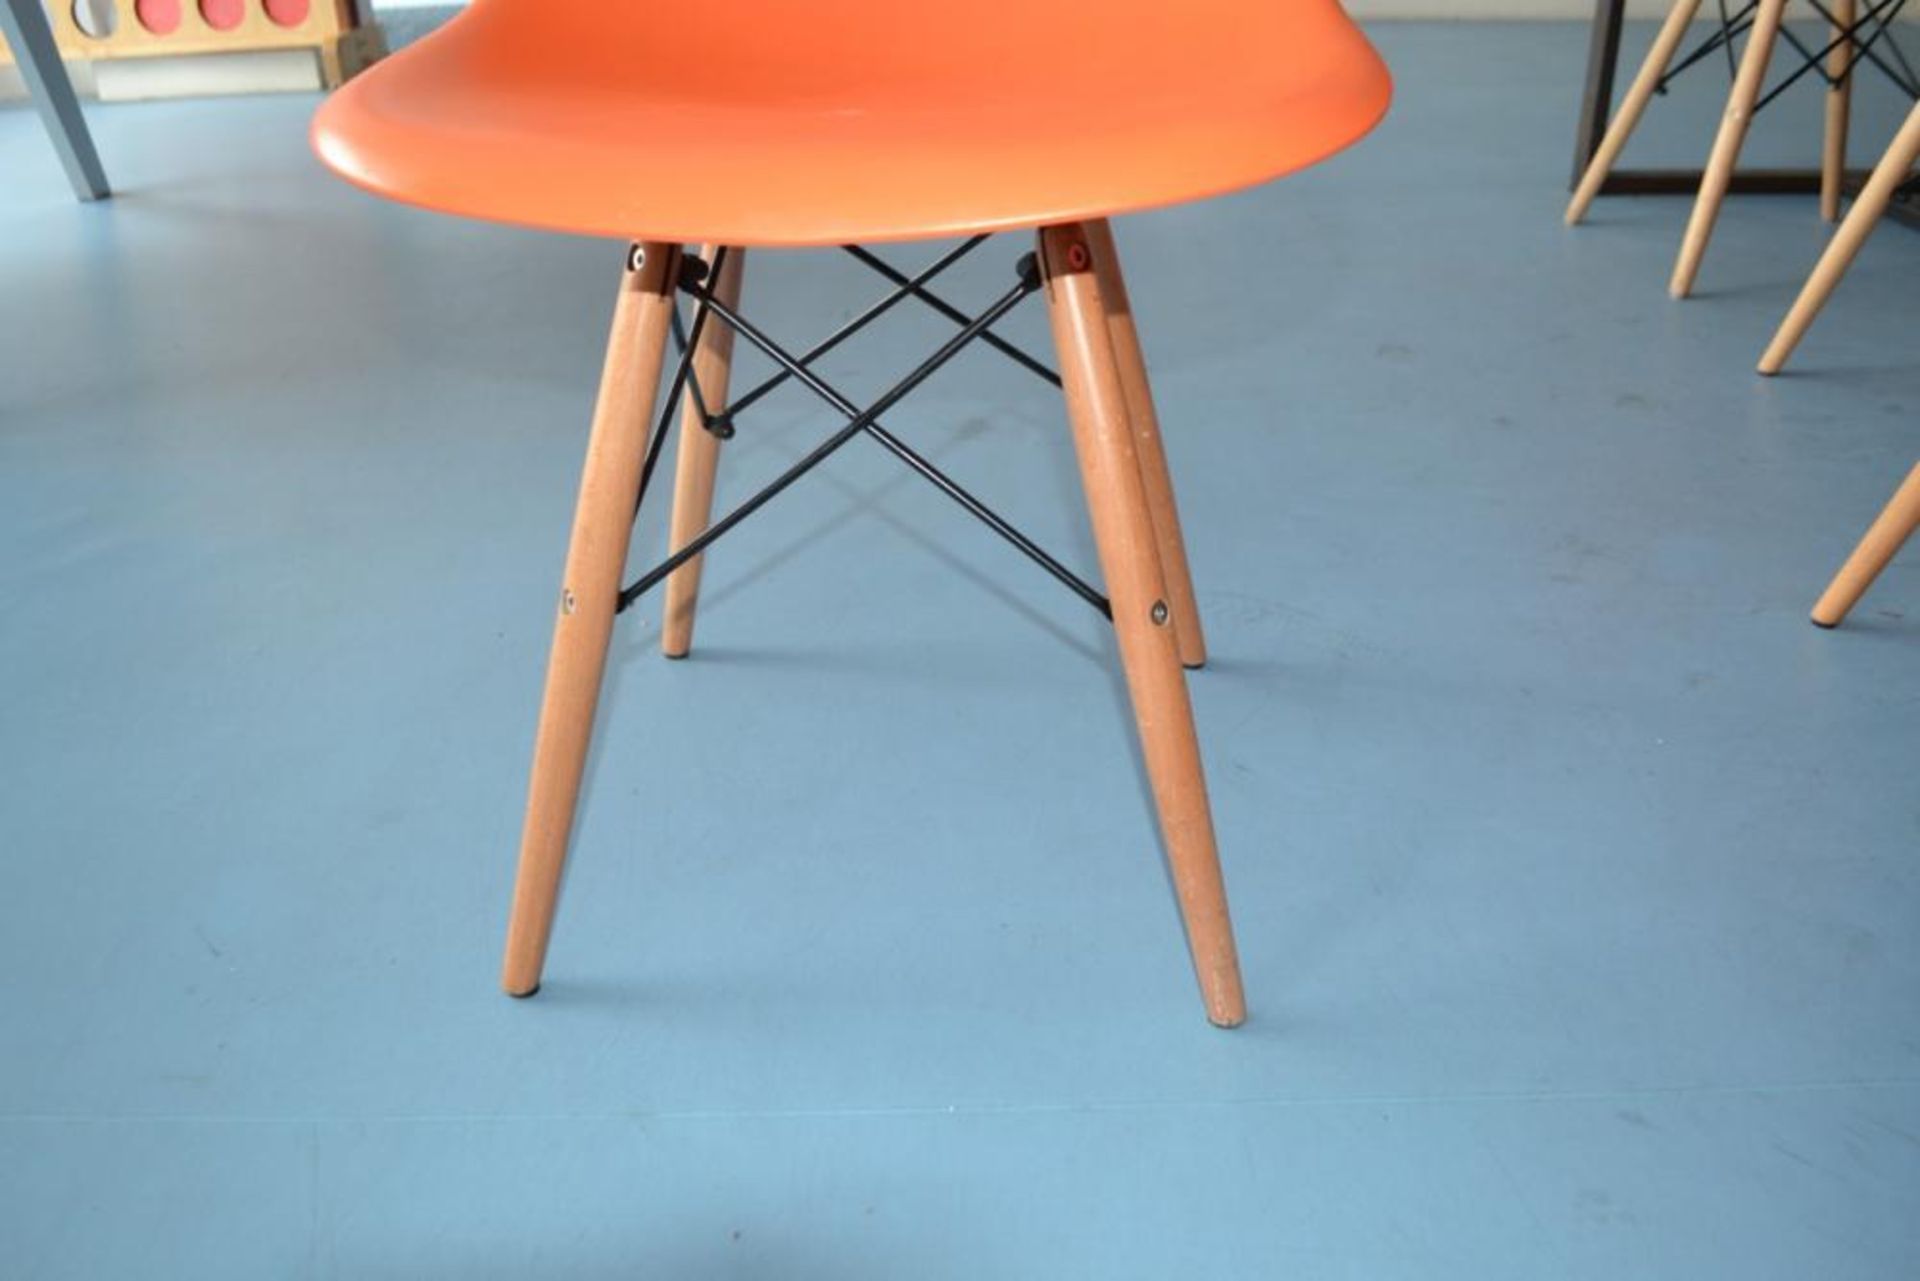 12 x Children's Red and Orange Charles and Ray Eames Style Shell Chairs - CL425 - Location: Altrinch - Image 7 of 9